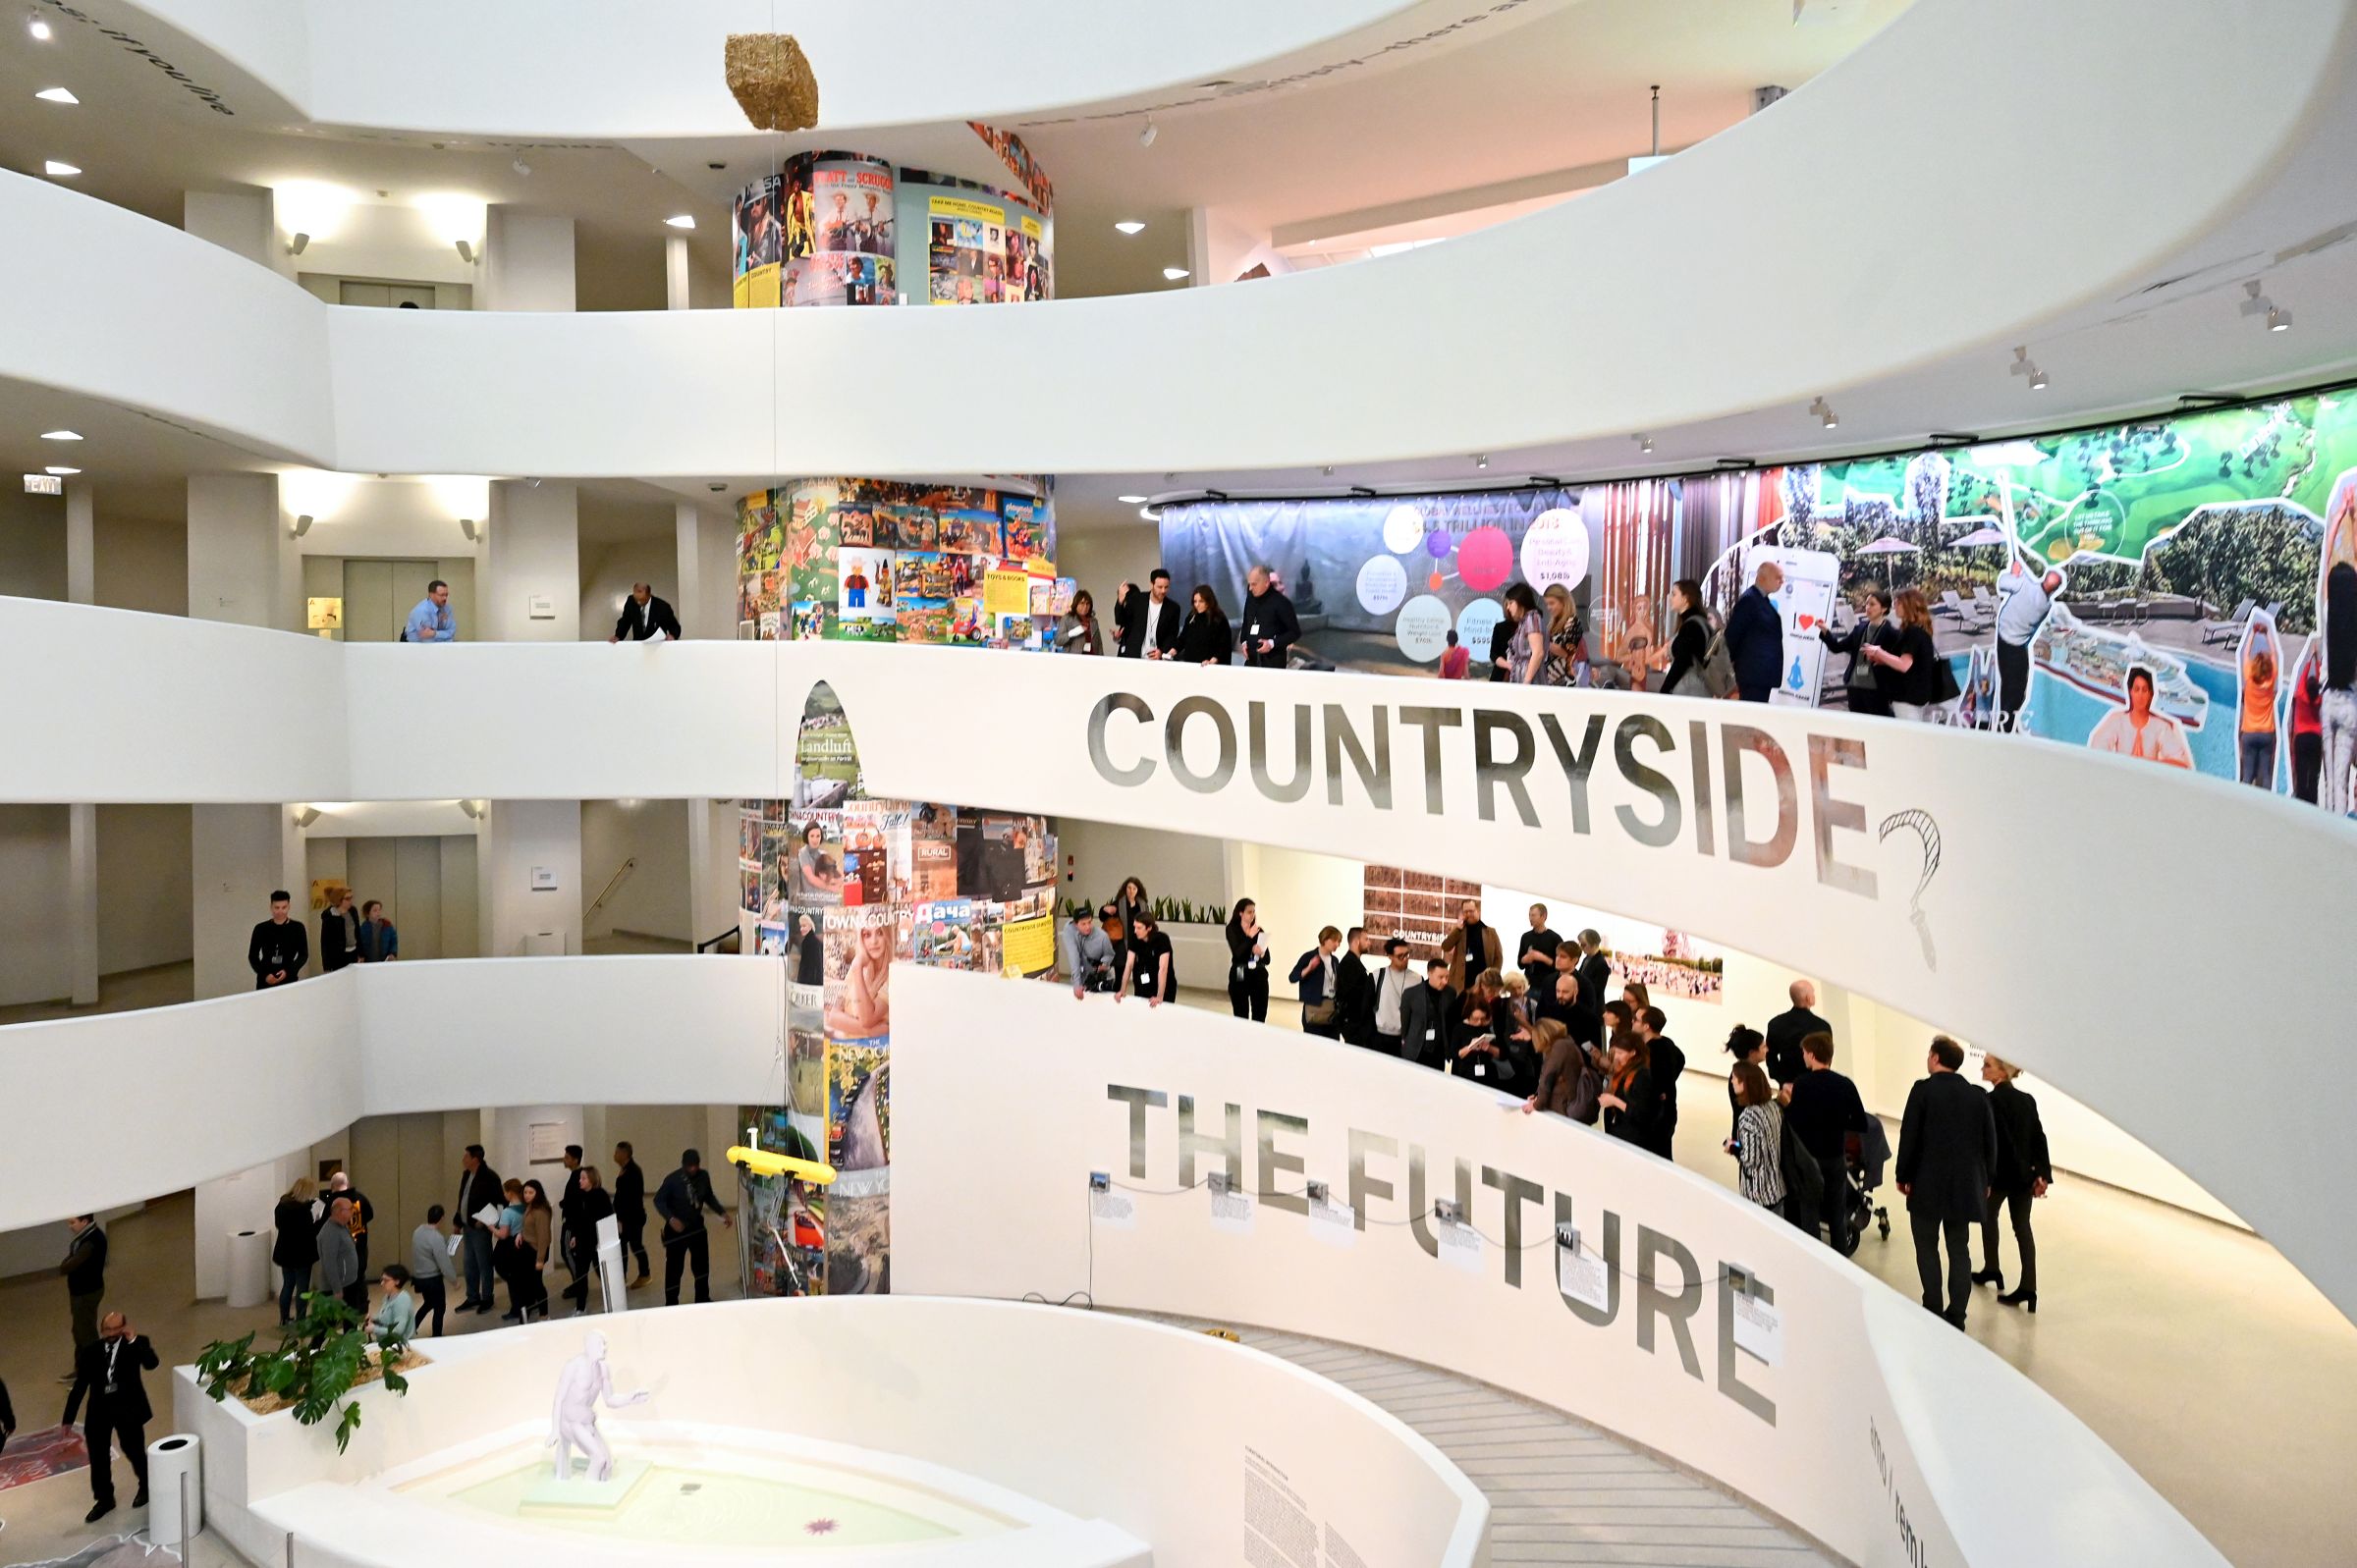 Lavazza Continues To Grow Partnership With The Solomon R. Guggenheim Museum In New York Supporting the Latest Exhibition, Countryside, The Future - Day 1